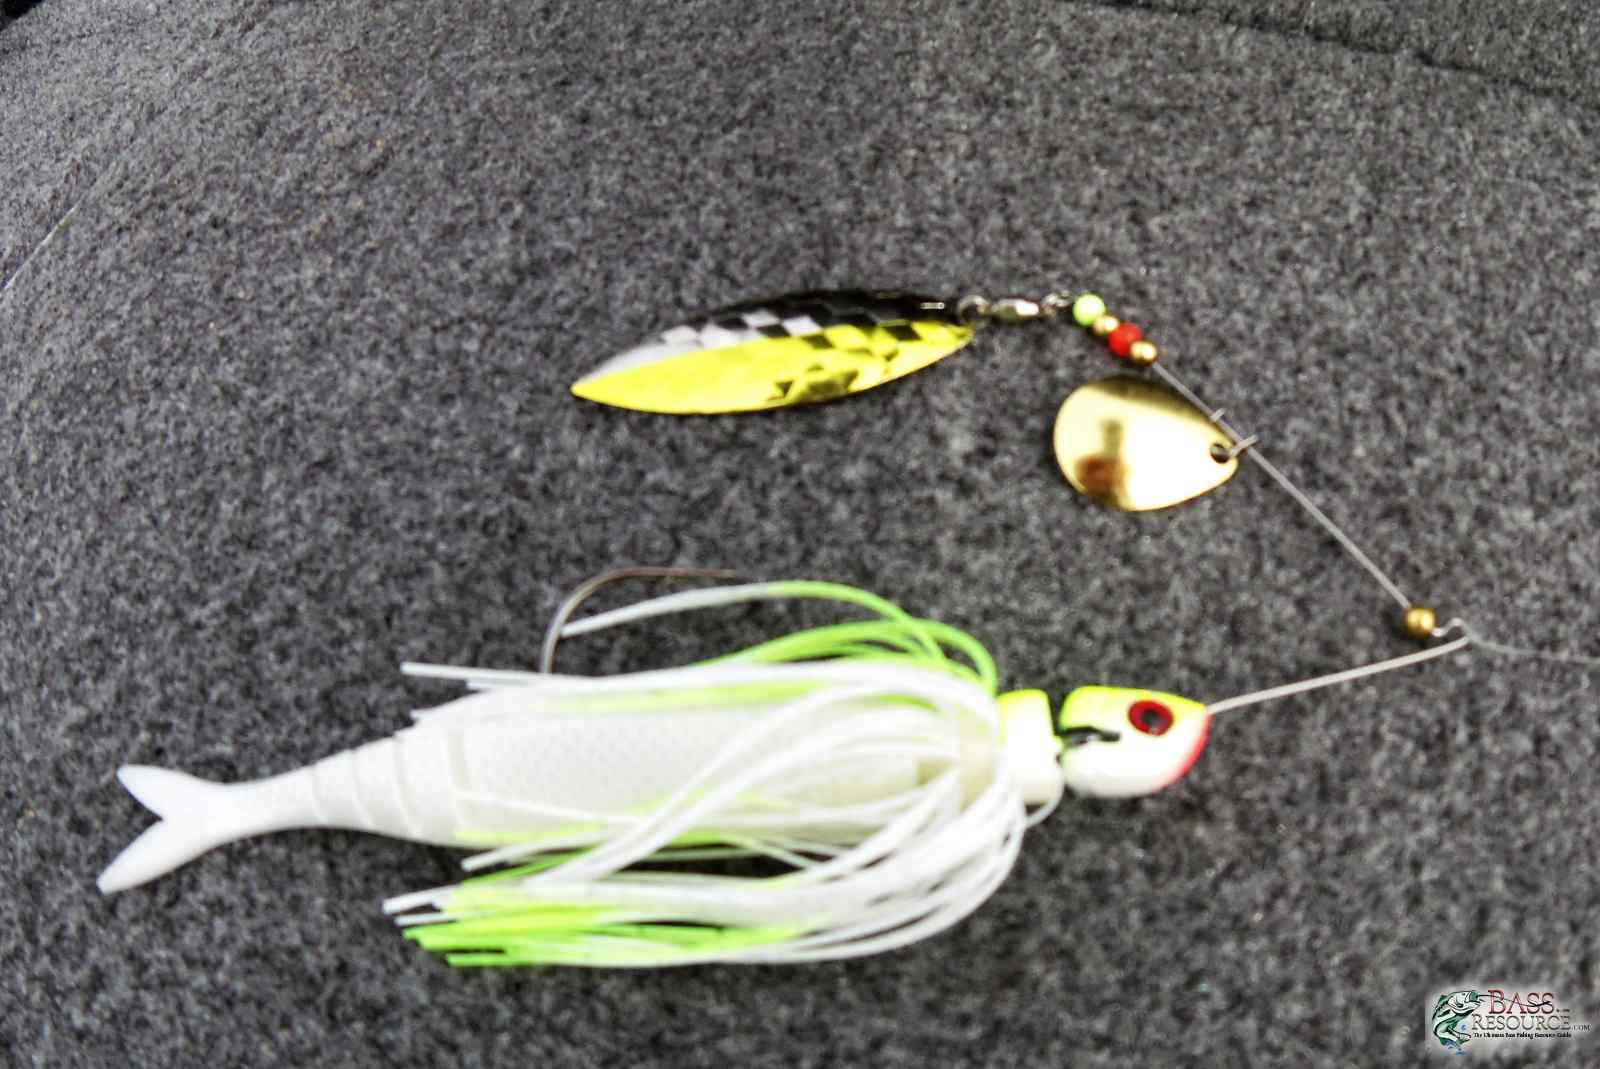 Favorite Spinnerbait Brand / Series ? - Fishing Tackle - Bass Fishing Forums